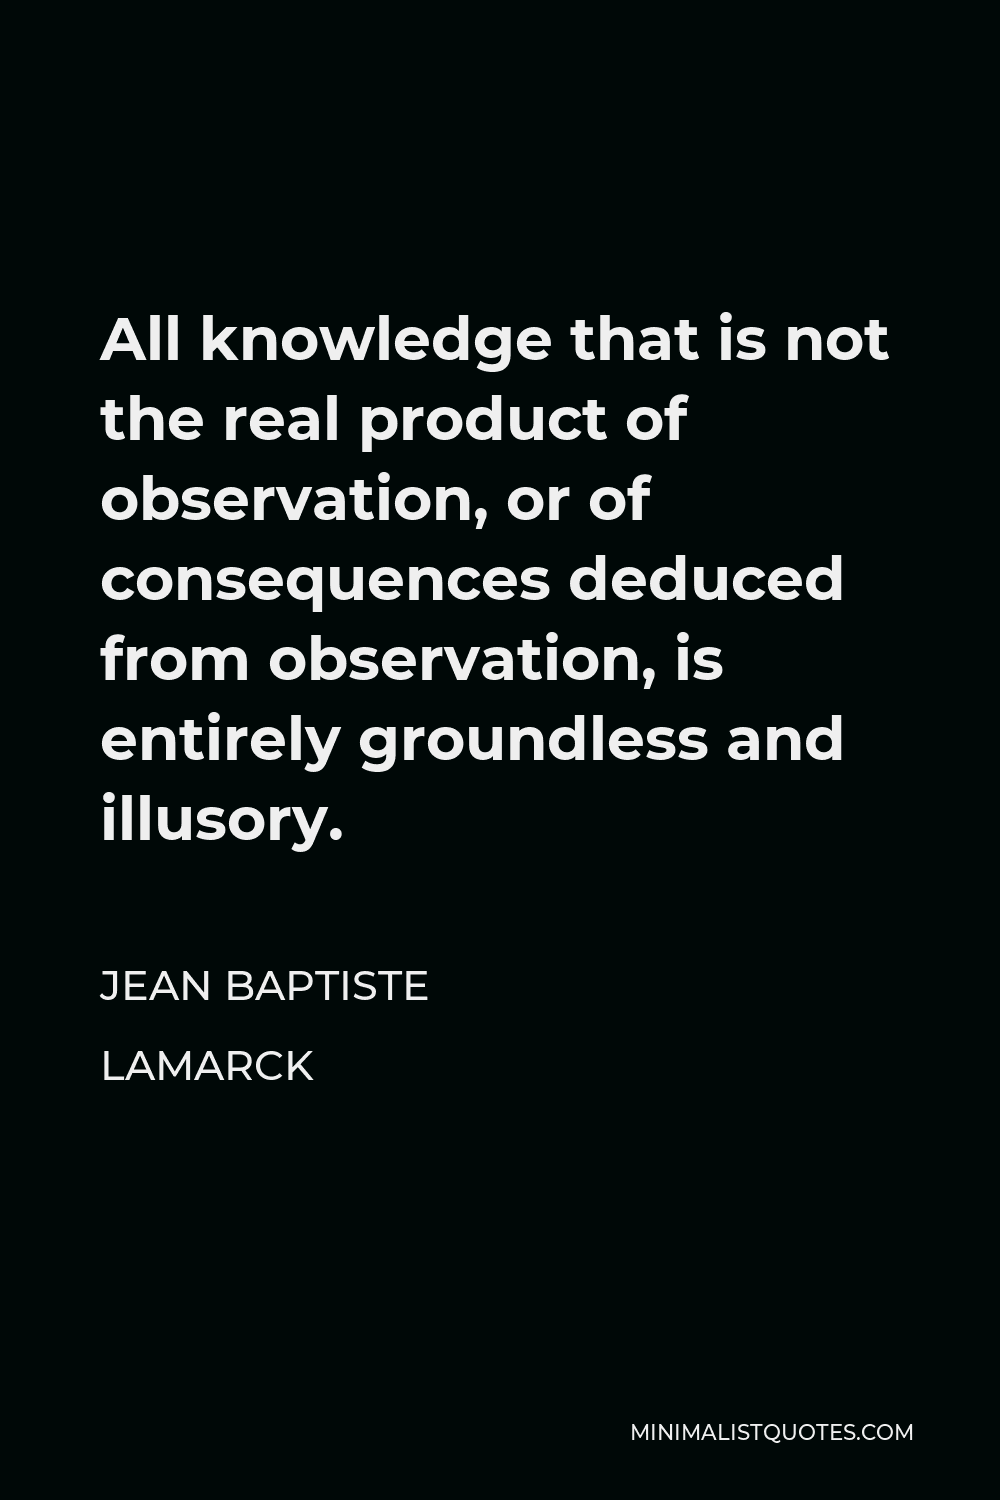 Jean Baptiste Lamarck Quote - All knowledge that is not the real product of observation, or of consequences deduced from observation, is entirely groundless and illusory.